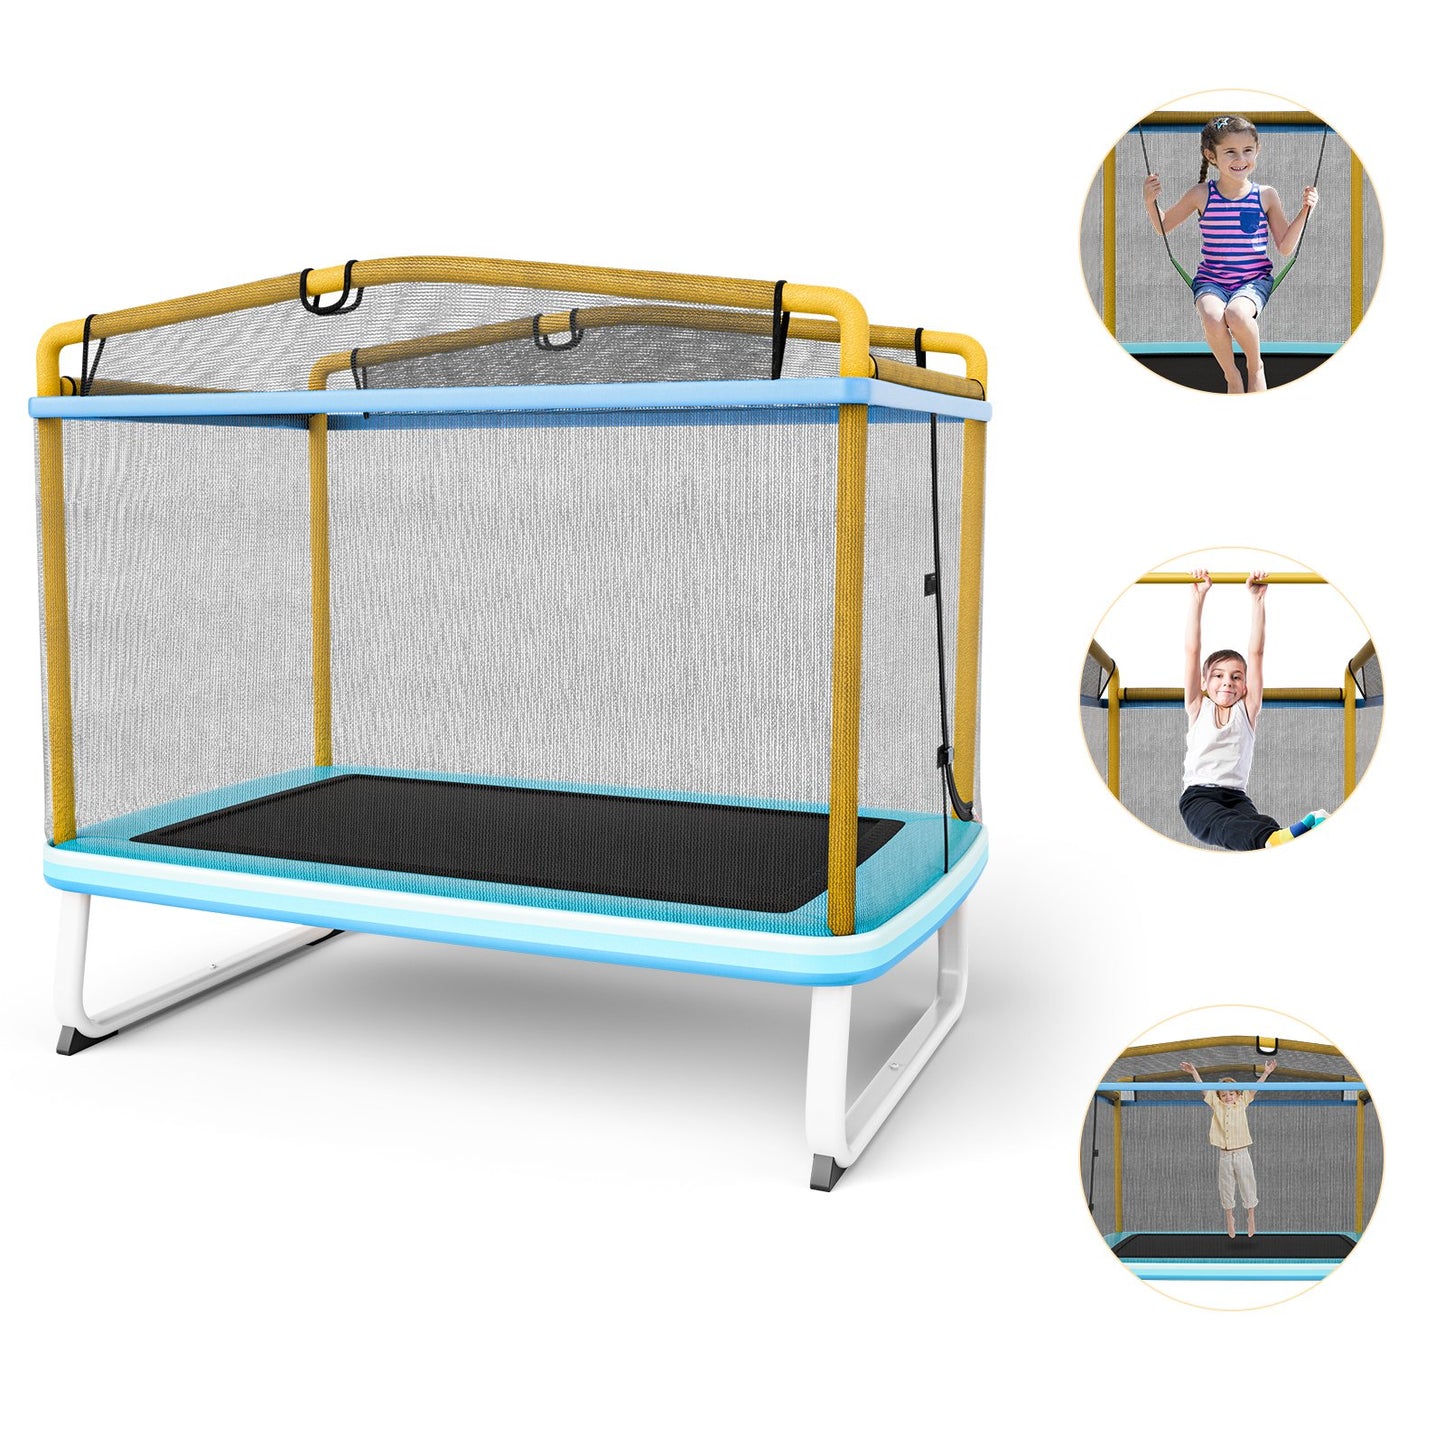 6 Feet Rectangle Trampoline with Swing Horizontal Bar and Safety Net, Yellow - Gallery Canada